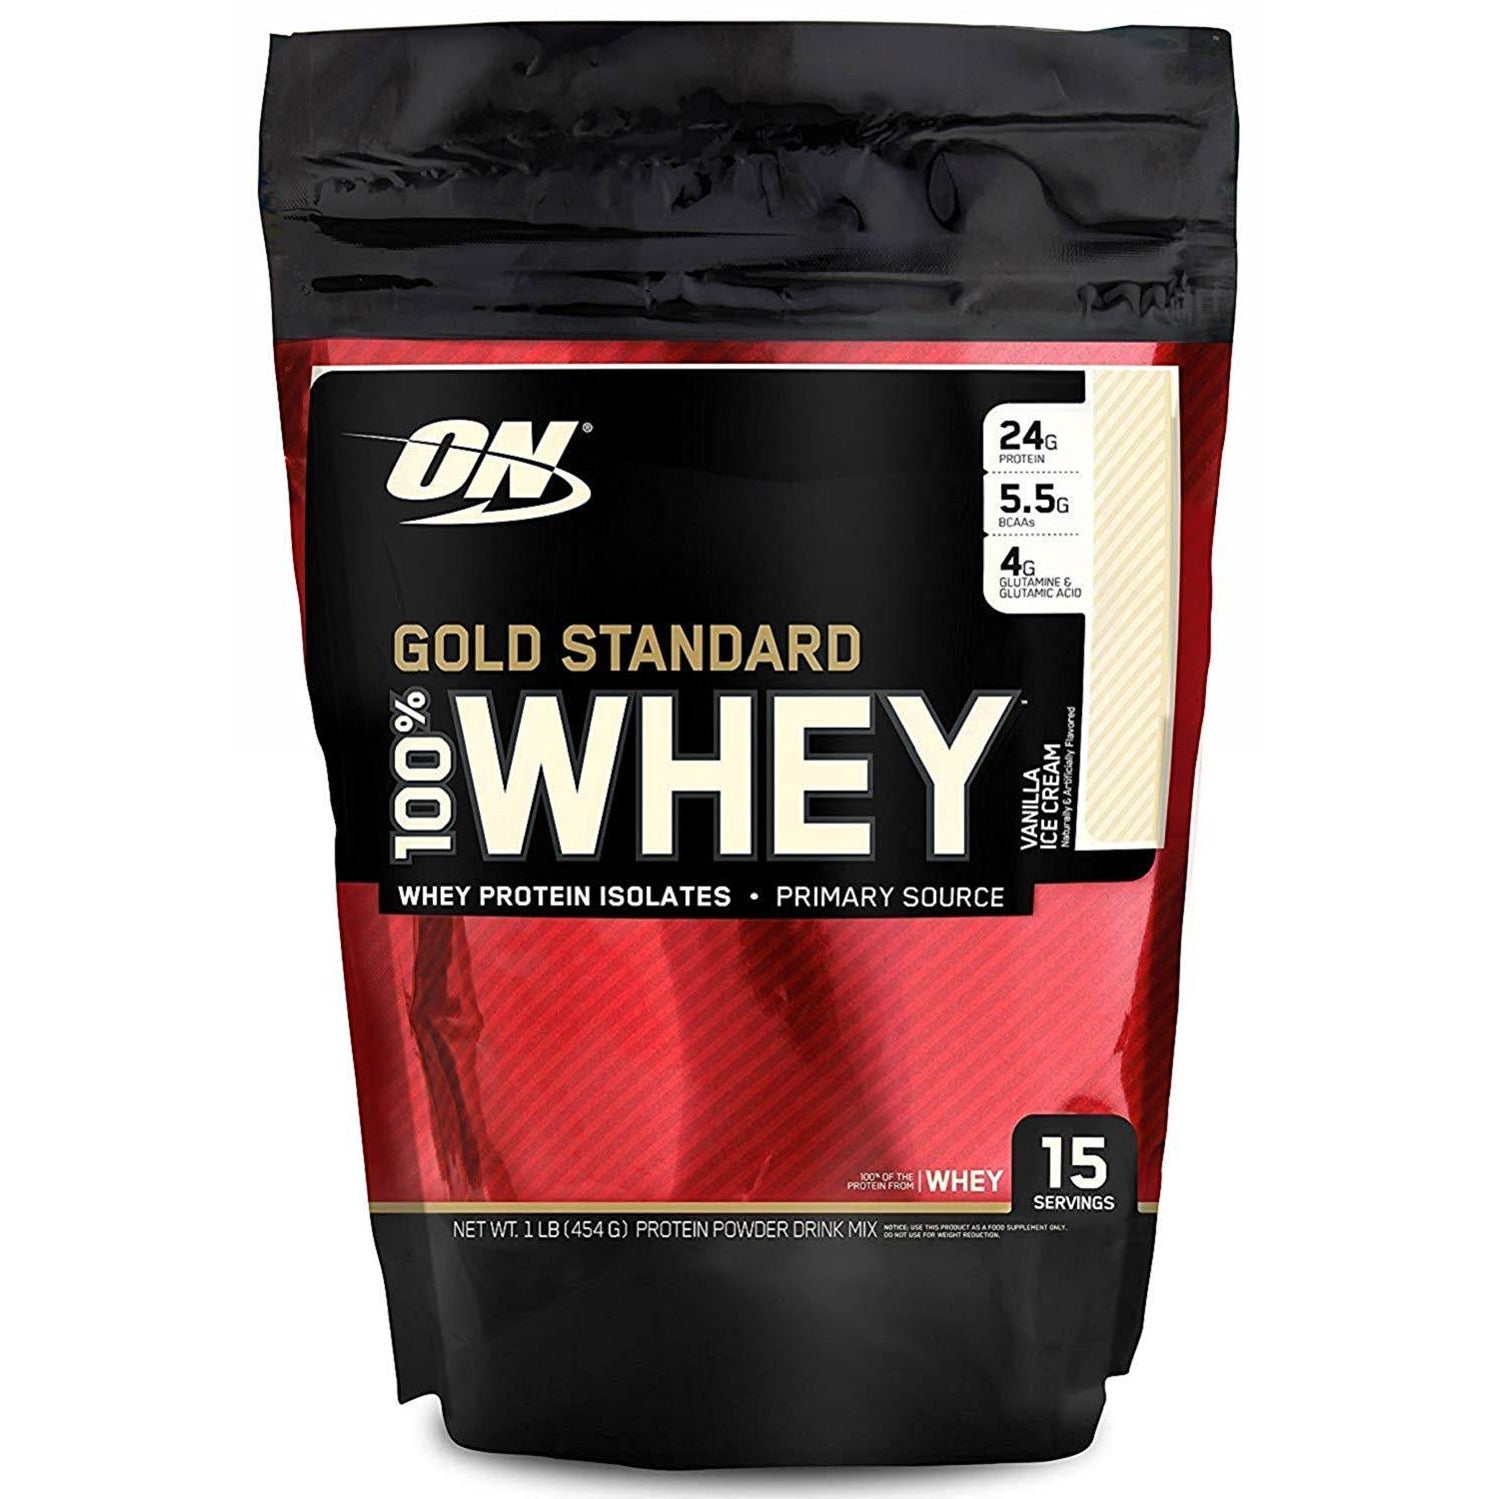 Optimum Nutrition Gold Standard 100% Whey (1lb) optimum-nutrition-gold-standard-100-whey-1lb Whey Protein Vanilla Ice Cream,Double Rich Chocolate BEST BY 09/20 Optimum Nutrition